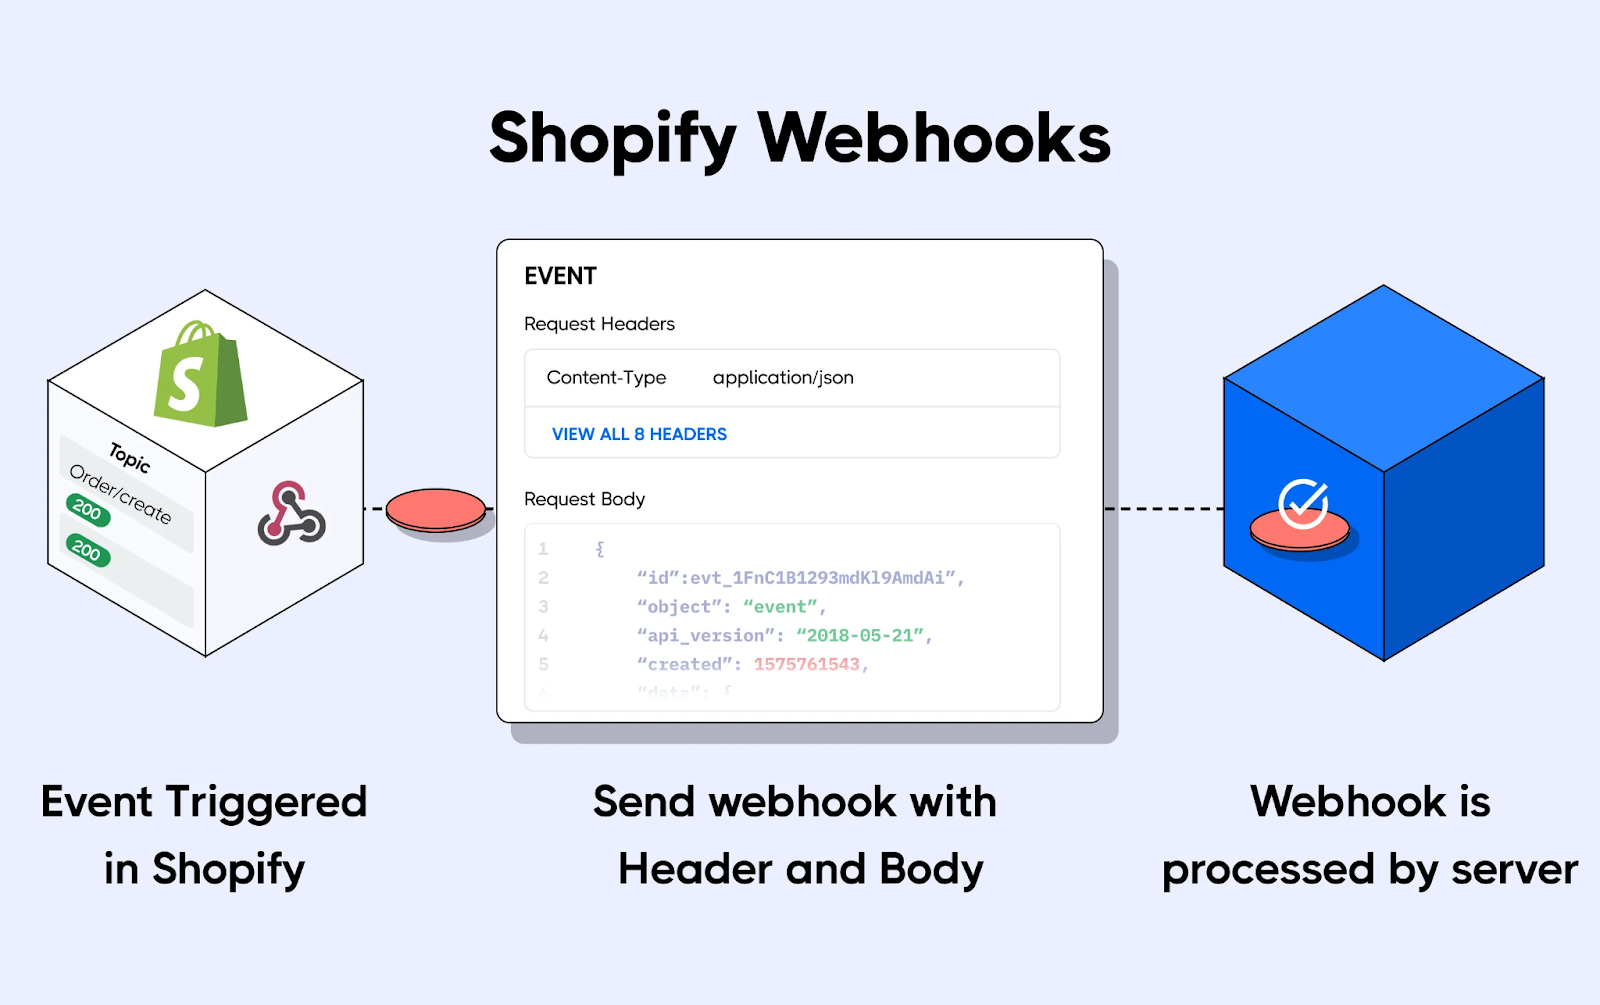 Setting Up Shopify Order Creation and Other Event Webhooks